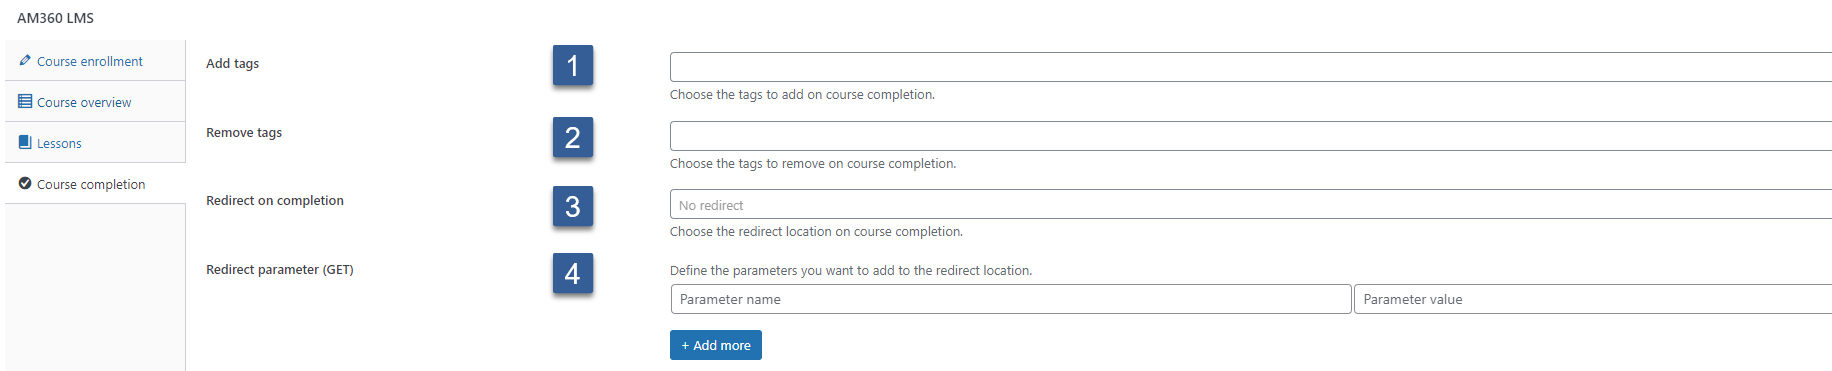 How to create a course - Course completion